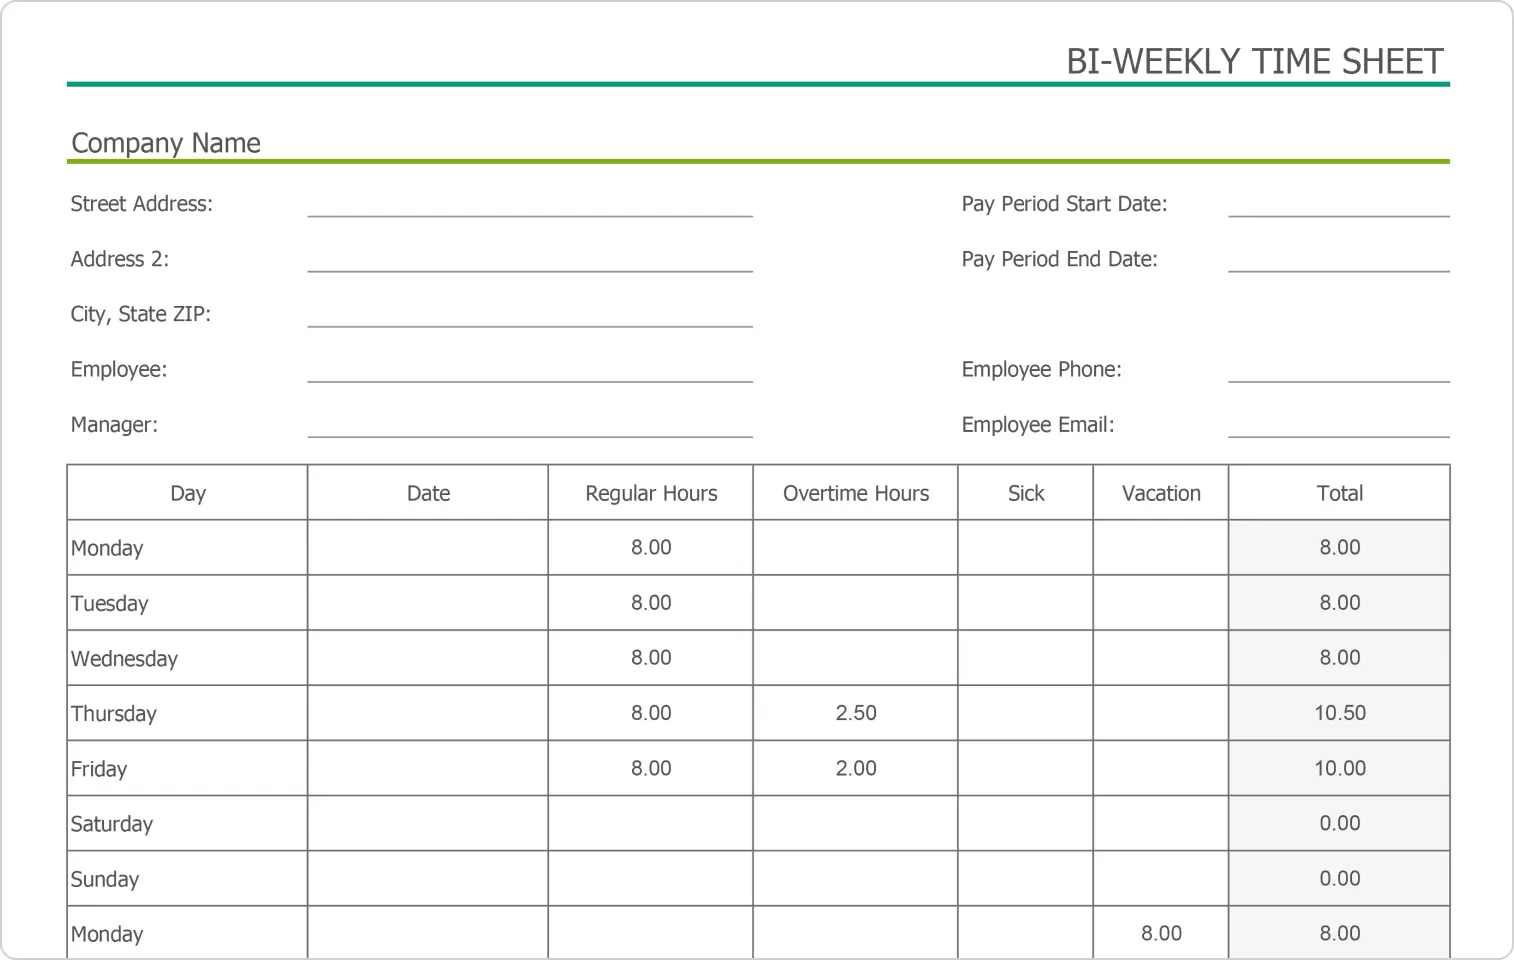 A screenshot of what the completed time sheet will look like. It features form fields where people can enter basic information like name and pay period, and a table with the days of the week and hours logged.